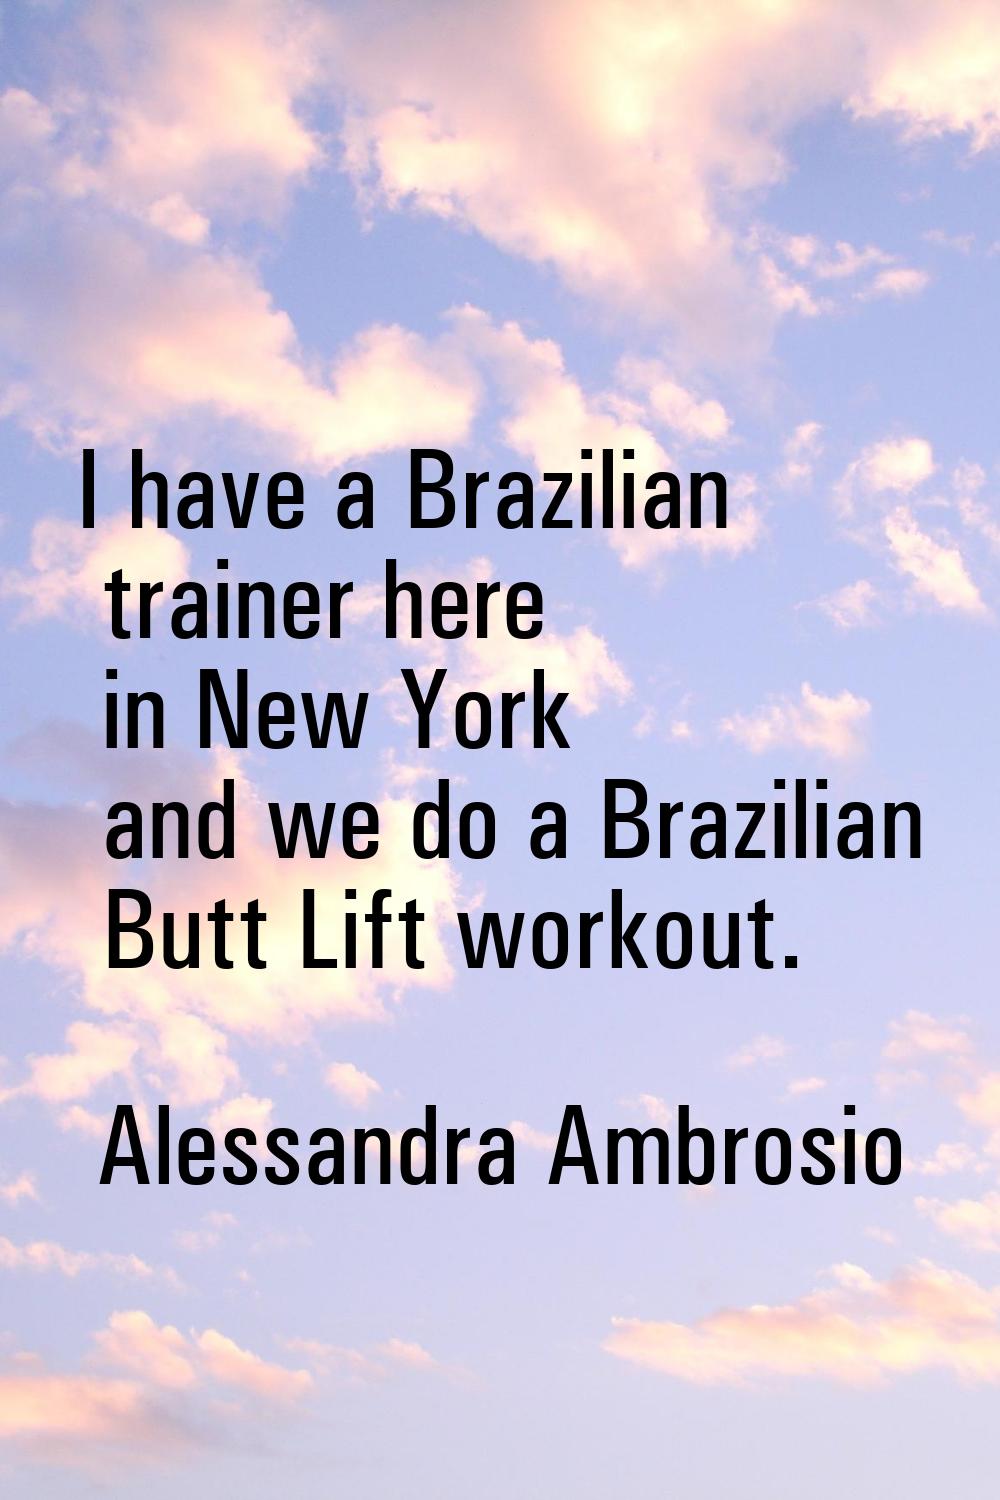 I have a Brazilian trainer here in New York and we do a Brazilian Butt Lift workout.